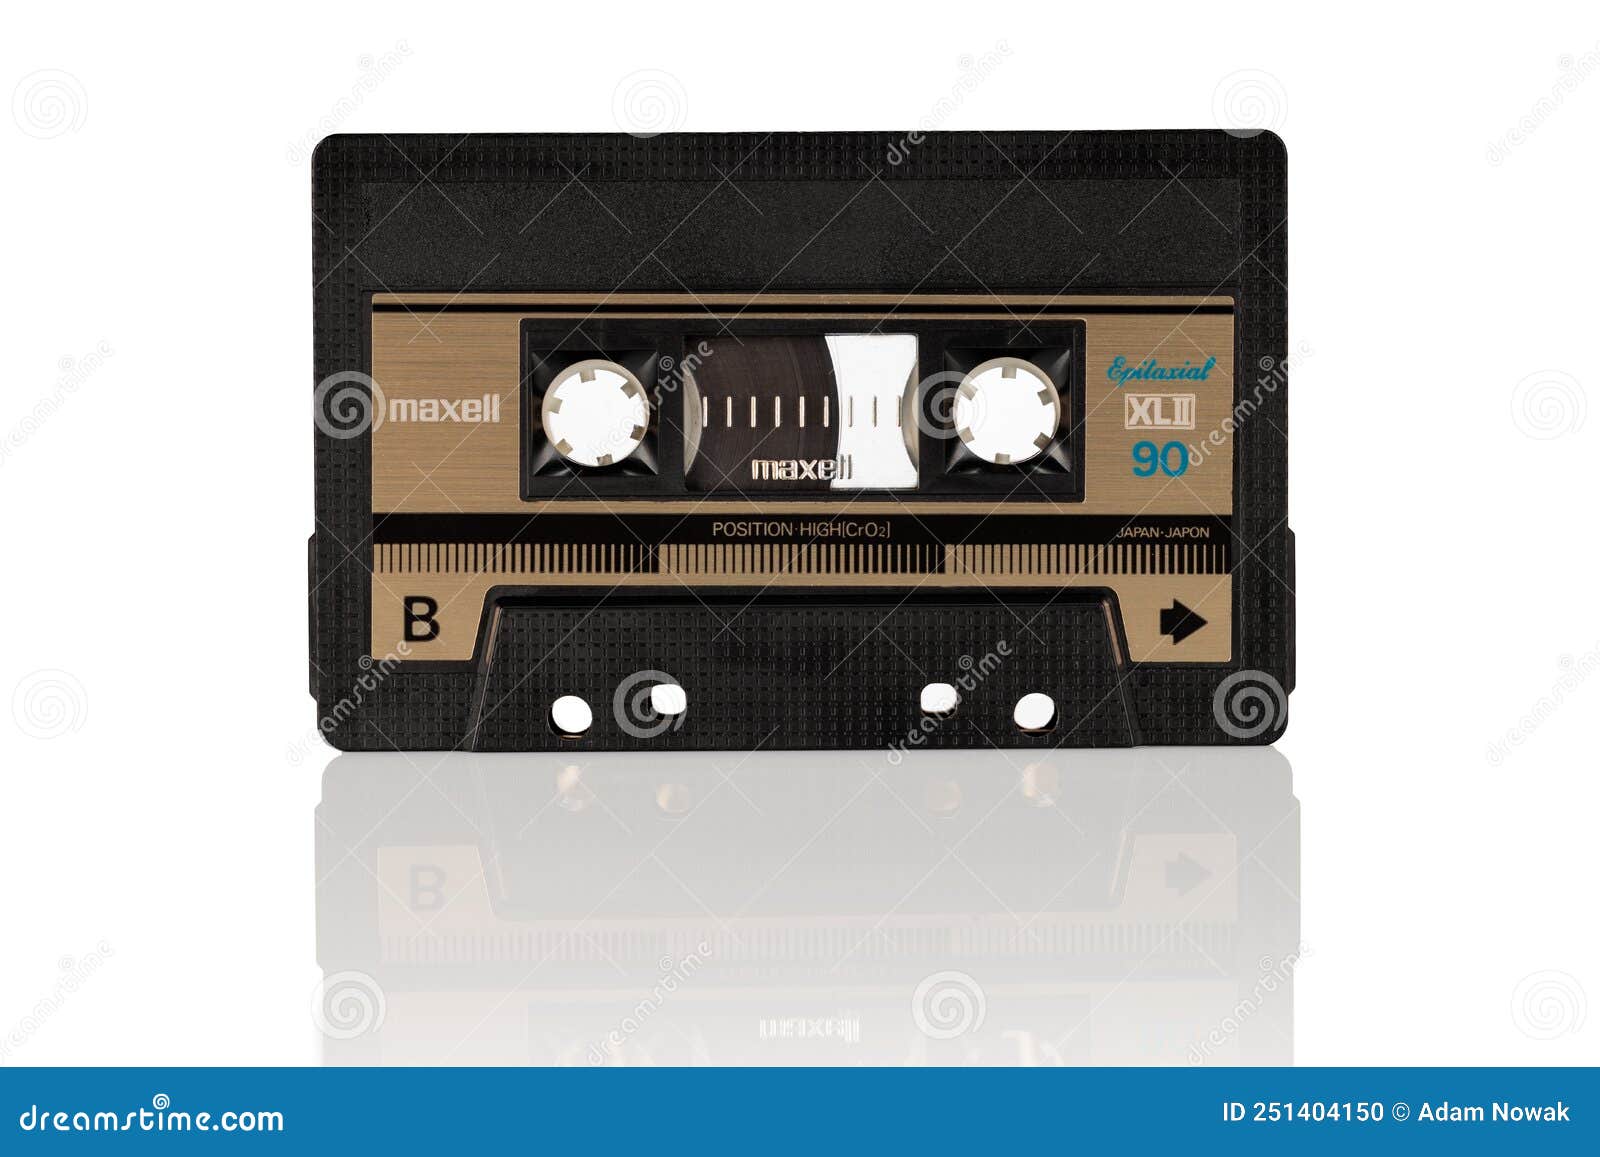 One Maxell XL II 90 Audio Cassette Tape Isolated on White Editorial Image -  Image of music, cassette: 251404150